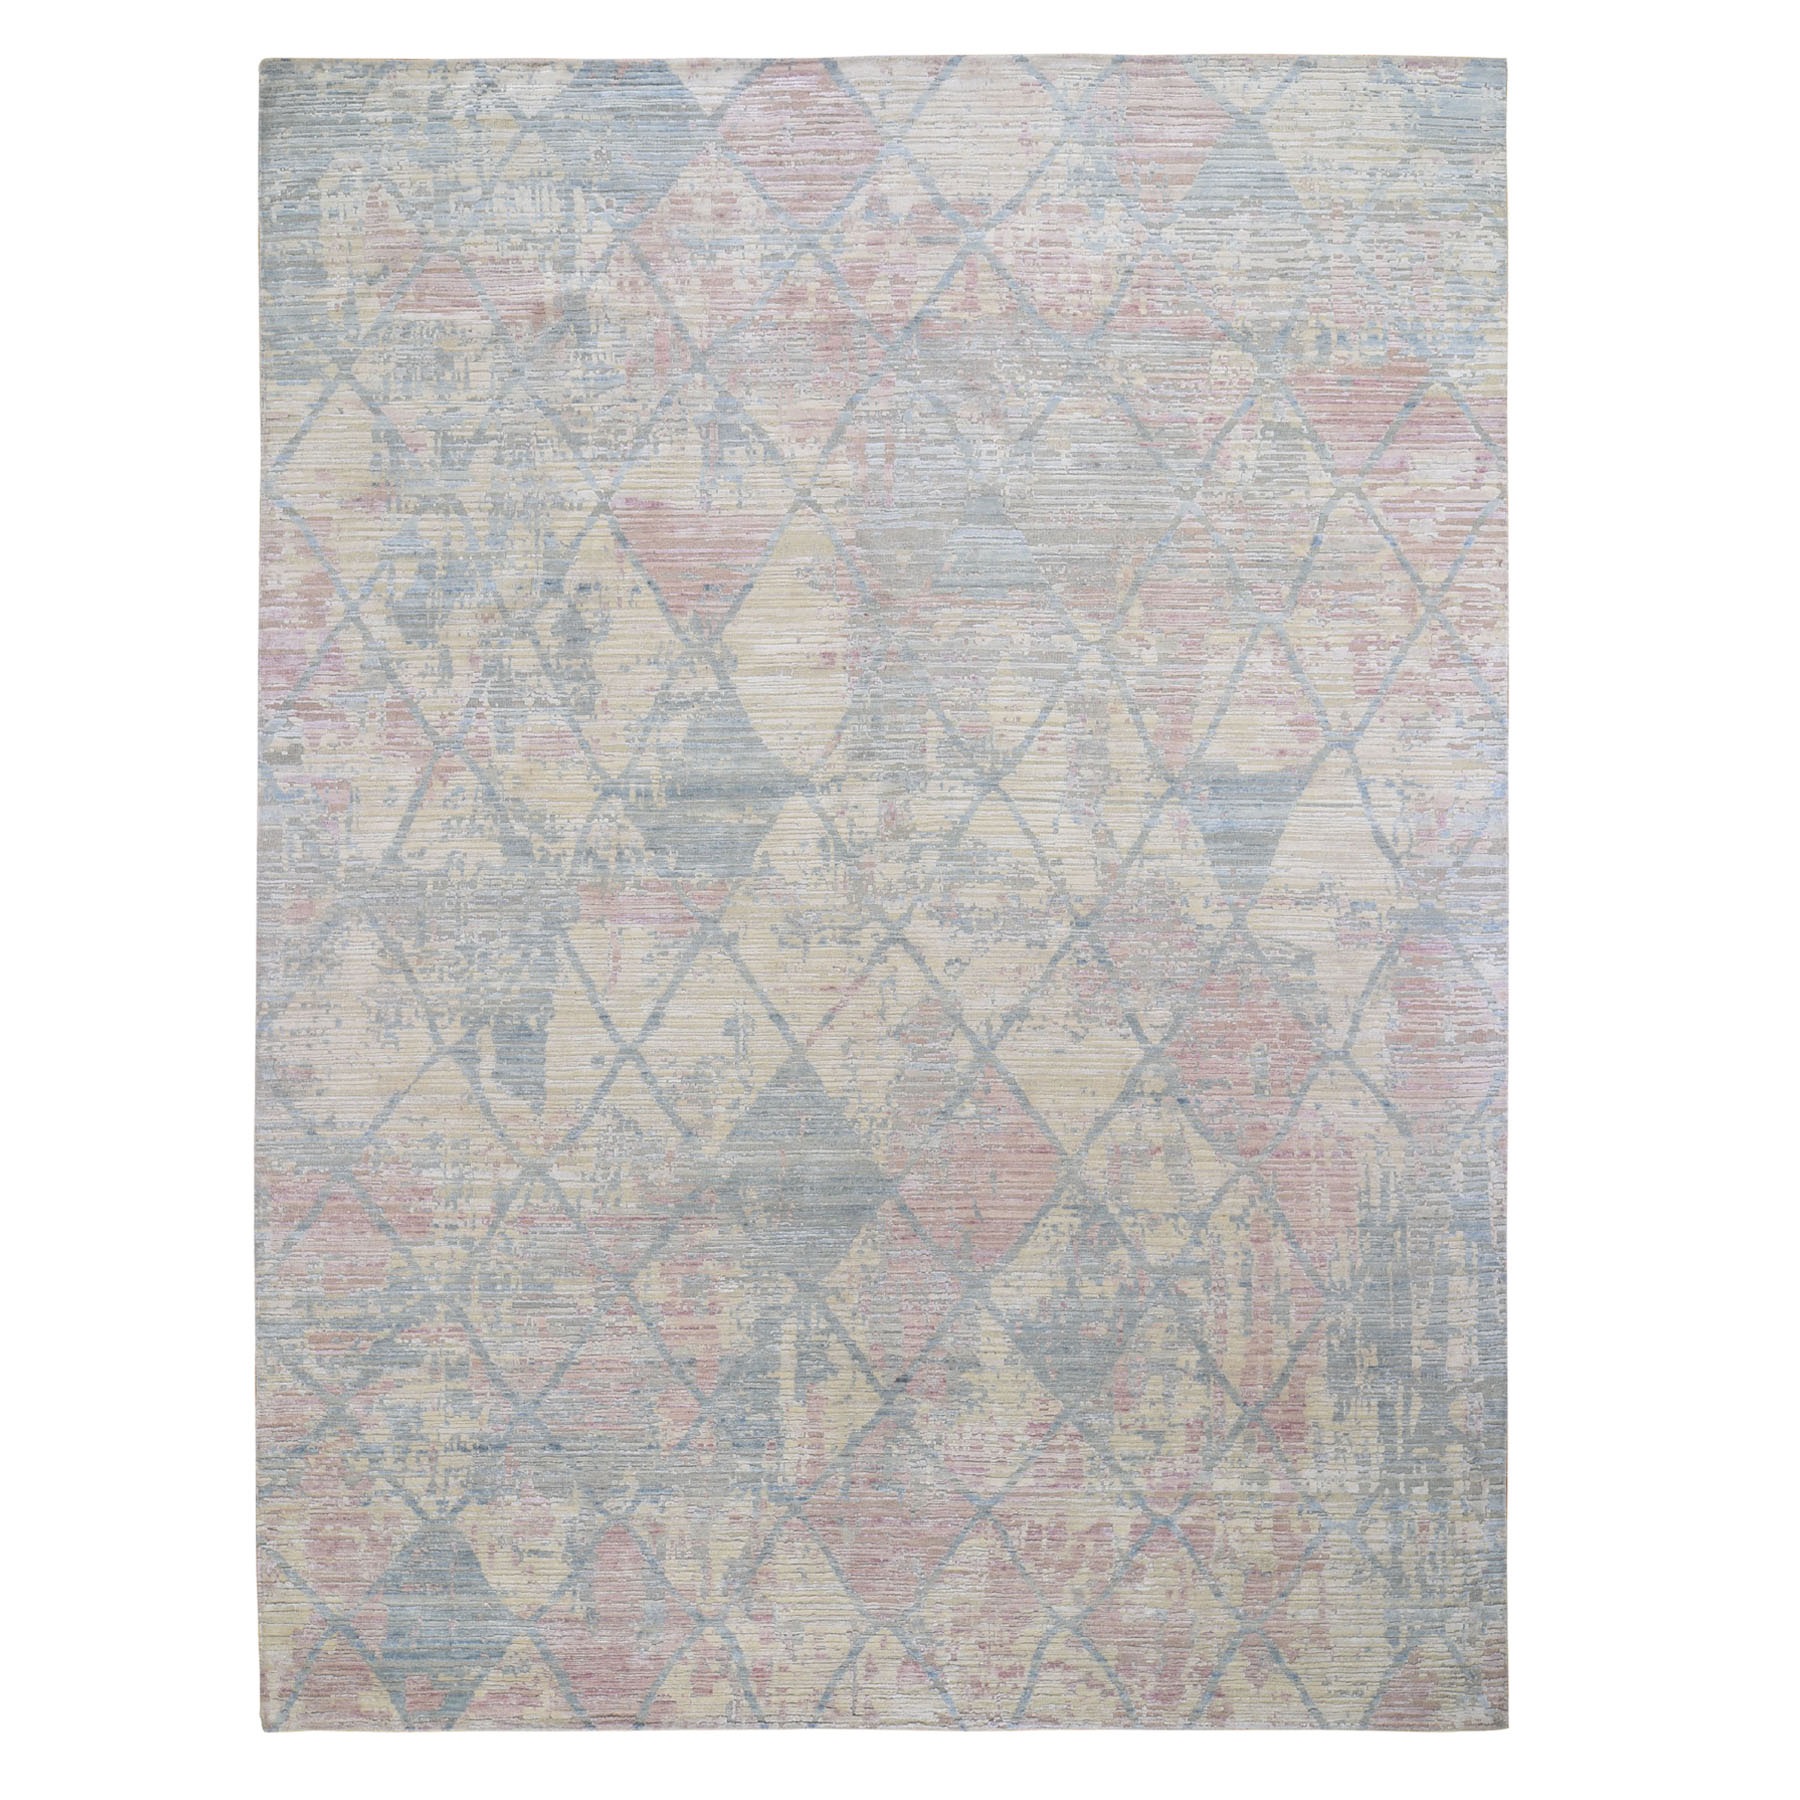 9'x11'10" Pastel Colors Textured Wool And Pure Silk Genuine Hand Woven Oriental Rug 